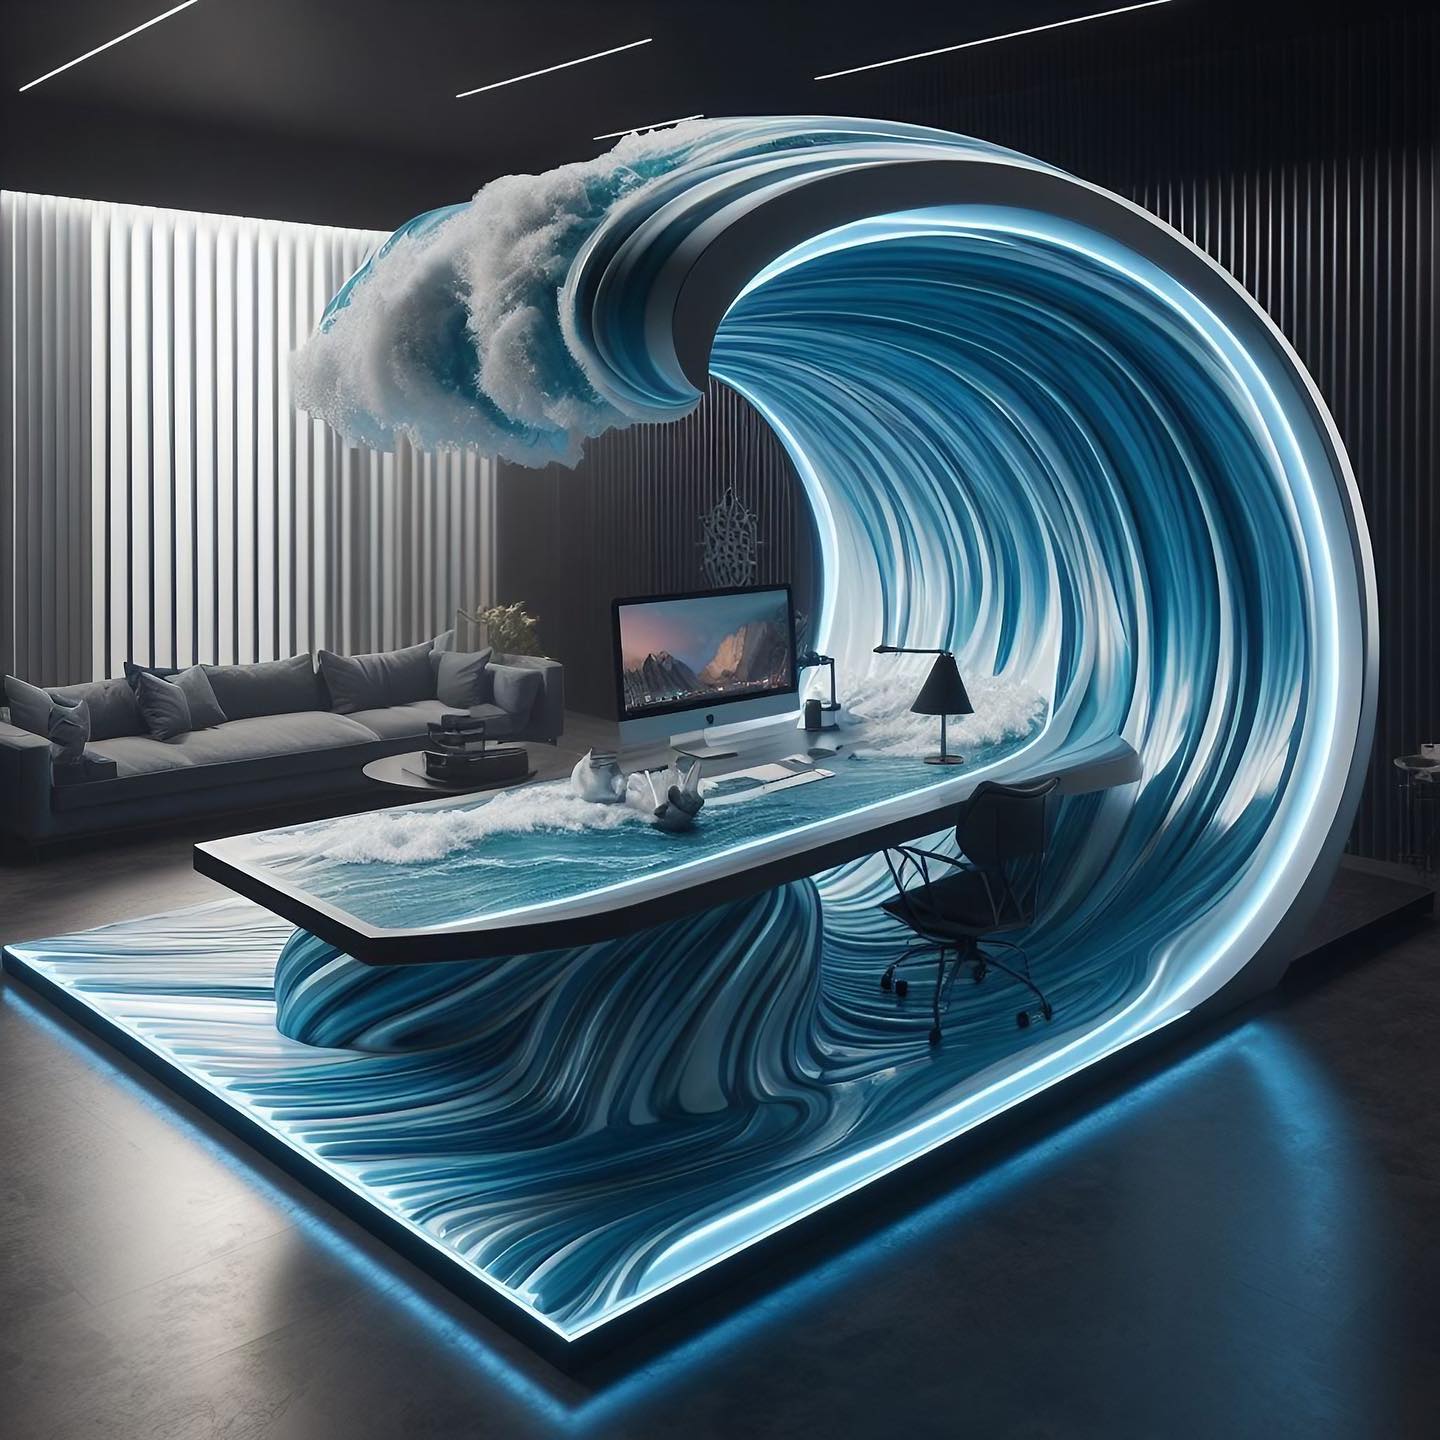 The Bookshelf is Designed to Capture the Fluid and Timeless Essence of the Sea